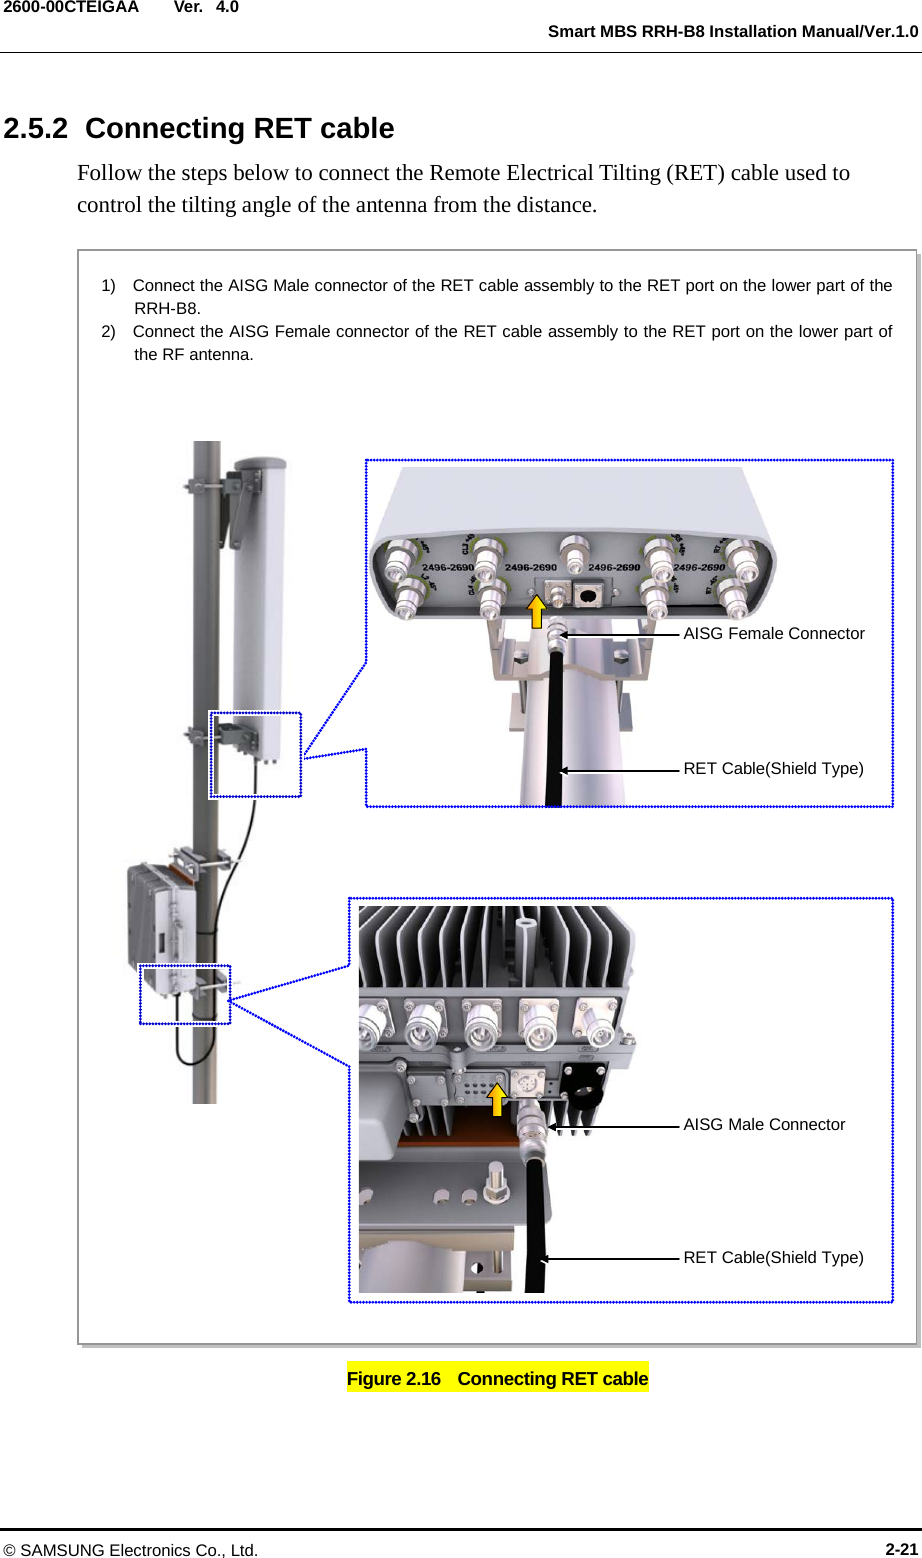  Ver.   Smart MBS RRH-B8 Installation Manual/Ver.1.0 2600-00CTEIGAA 4.0 2.5.2  Connecting RET cable Follow the steps below to connect the Remote Electrical Tilting (RET) cable used to control the tilting angle of the antenna from the distance.  Figure 2.16   Connecting RET cable   RET Cable(Shield Type) 1)  Connect the AISG Male connector of the RET cable assembly to the RET port on the lower part of the RRH-B8. 2)    Connect the AISG Female connector of the RET cable assembly to the RET port on the lower part of the RF antenna.   AISG Female Connector RET Cable(Shield Type) AISG Male Connector  © SAMSUNG Electronics Co., Ltd. 2-21 